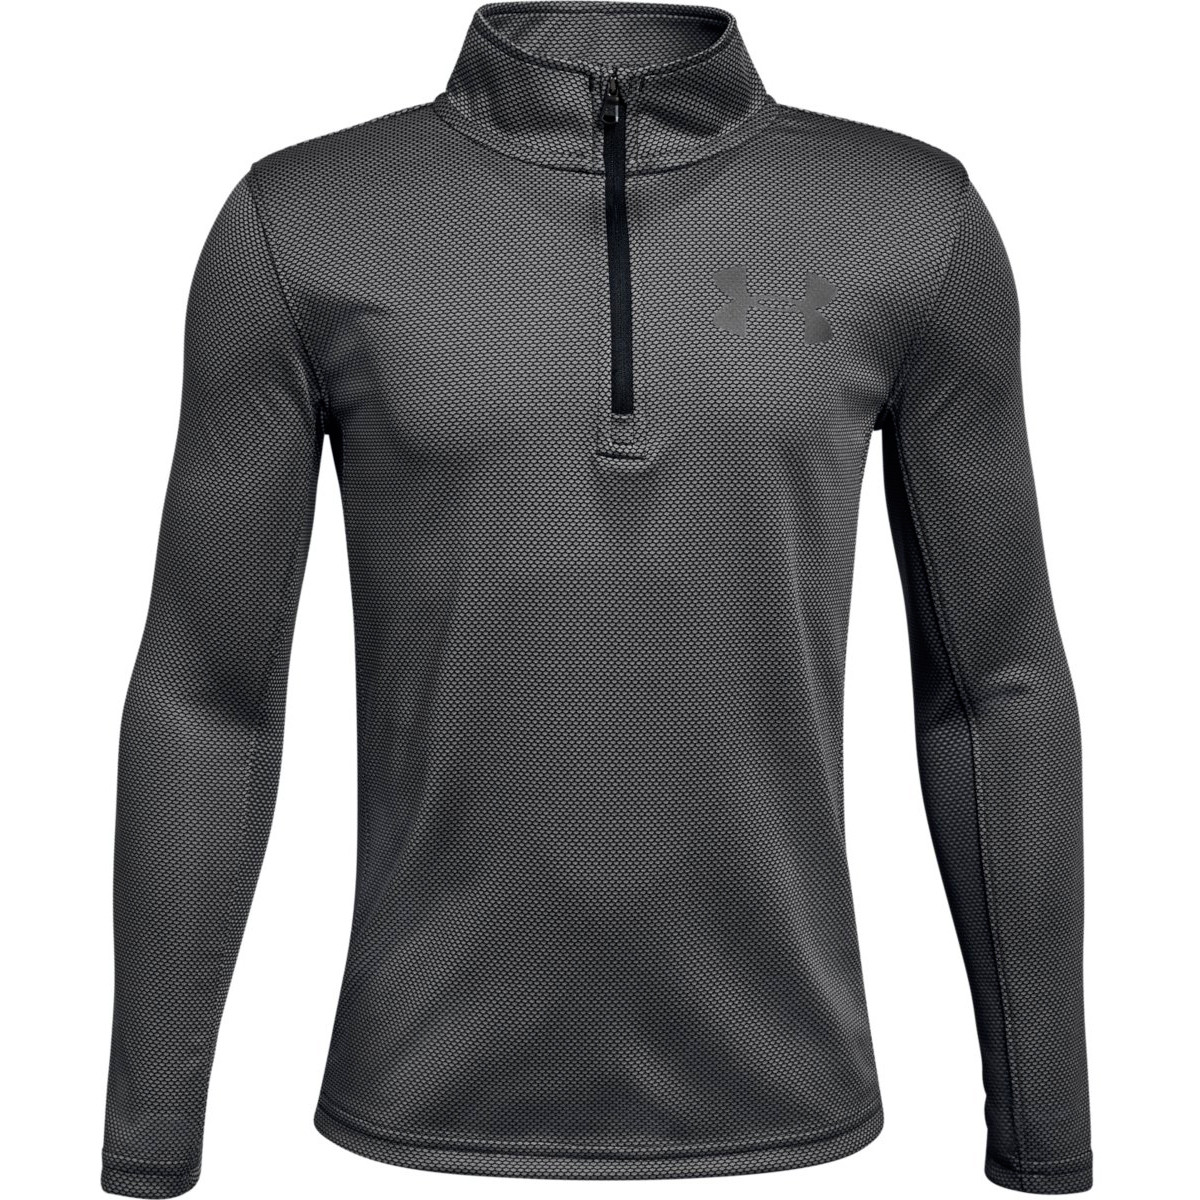 T-SHIRT UNDER ARMOUR JUNIOR TEXTURED MANCHES LONGUES